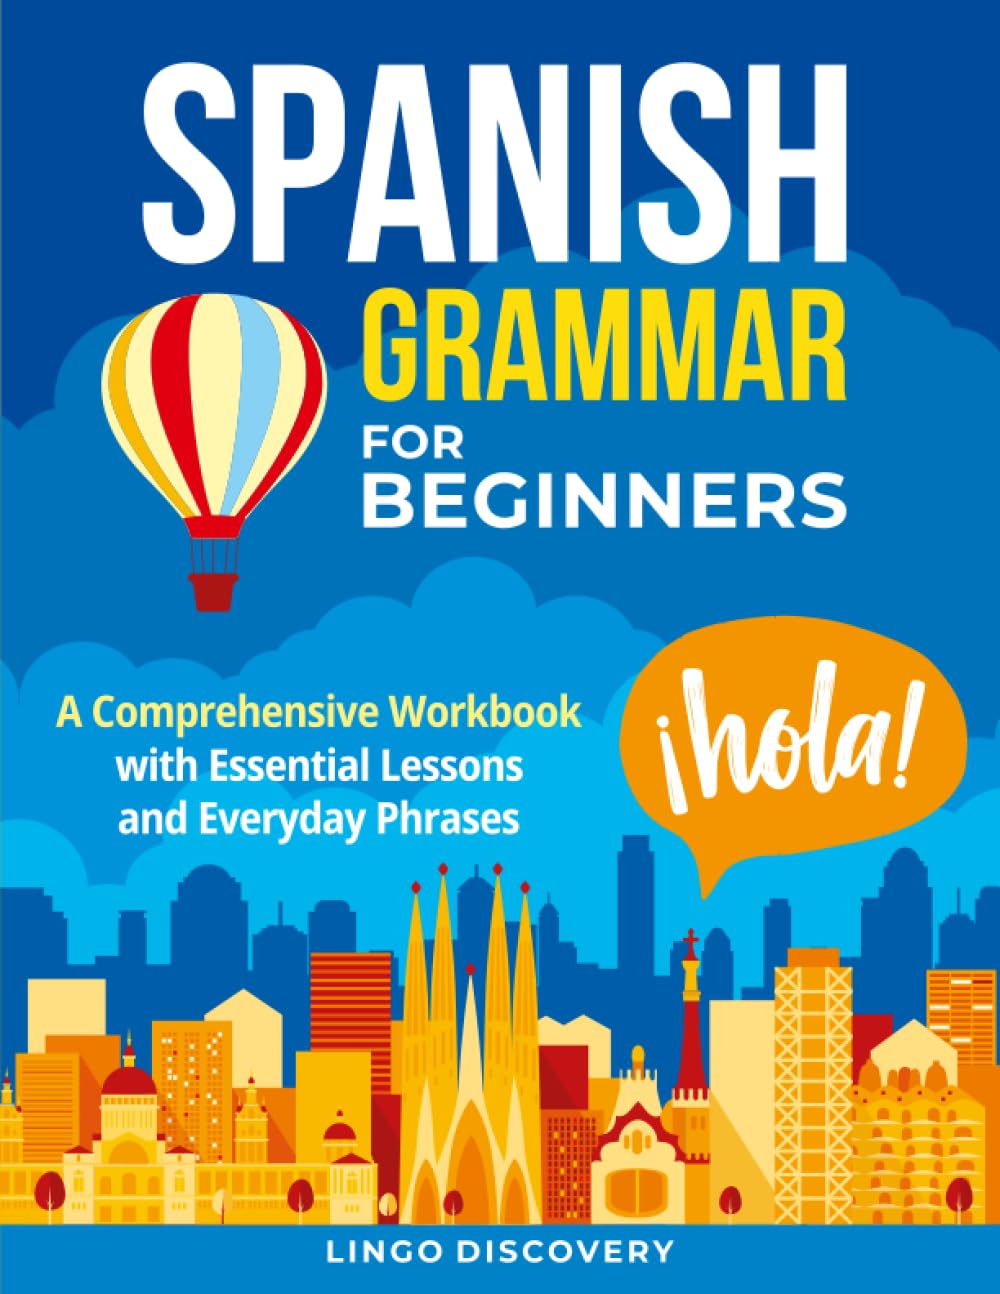 Spanish Grammar For Beginners: A Comprehensive Workbook with Essential Lessons and Everyday Phrases